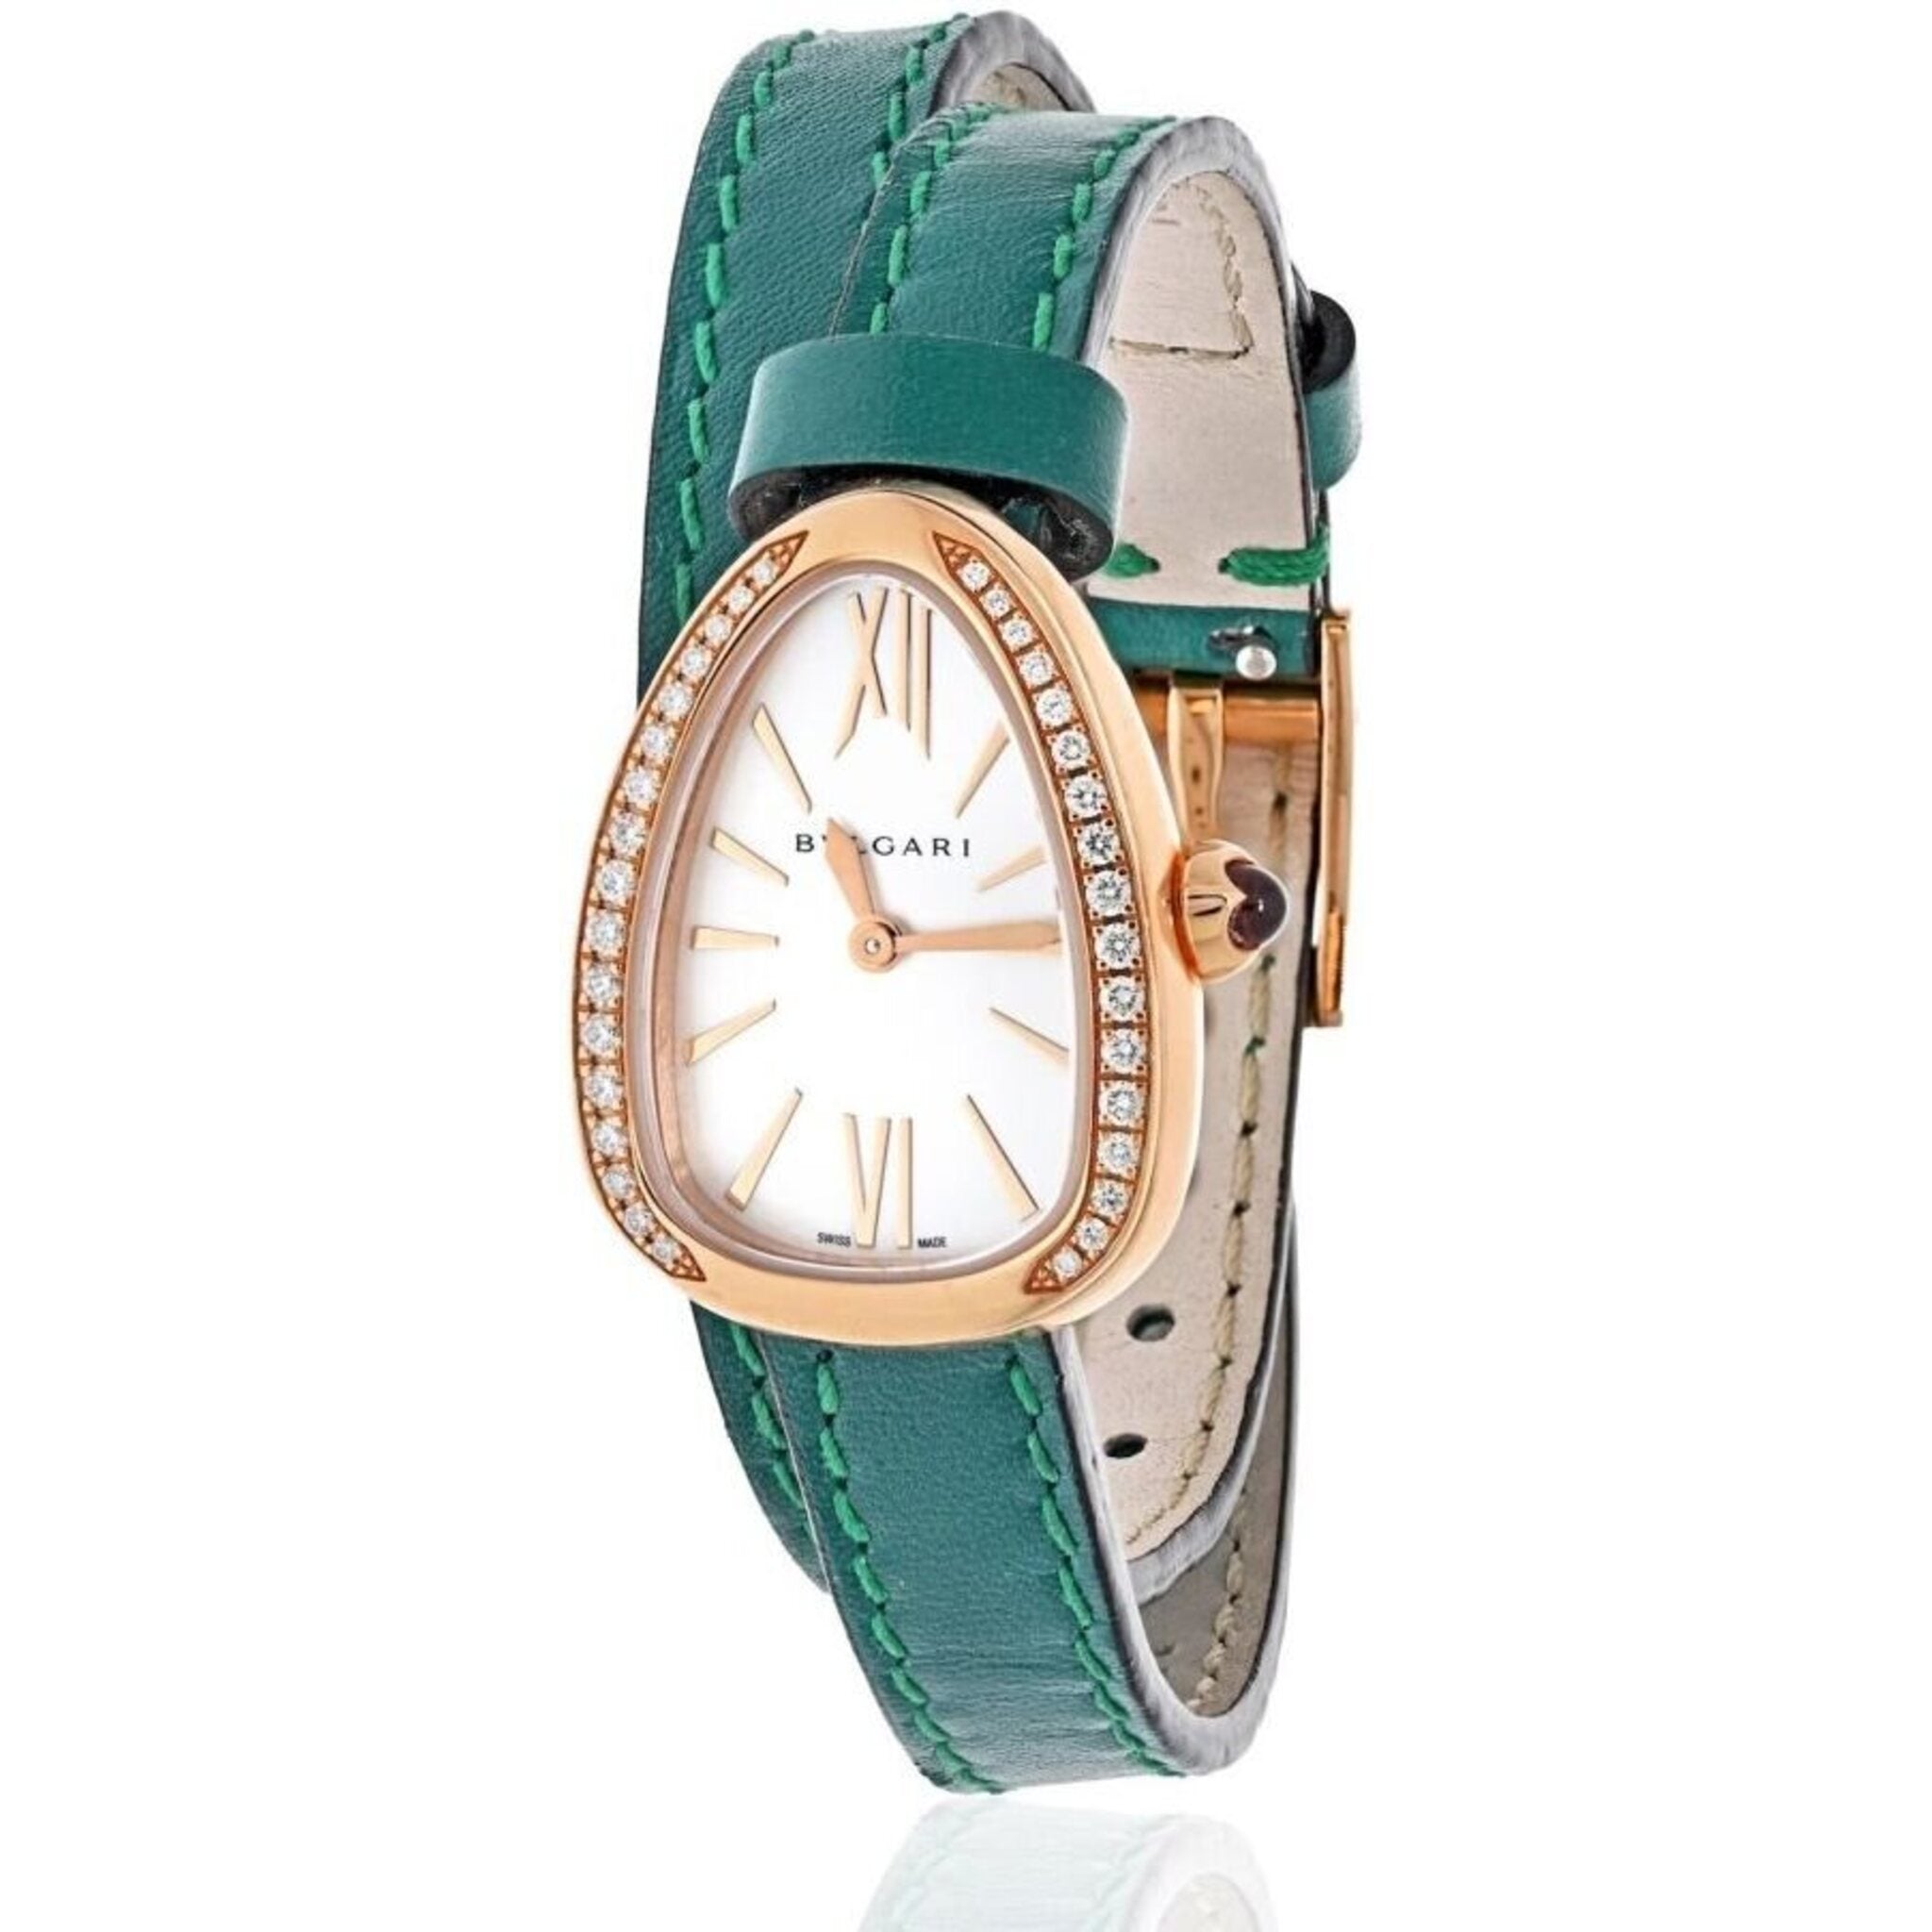 Women's Petite Link Bracelet Watch with Gold Dial - Peugeot Watches